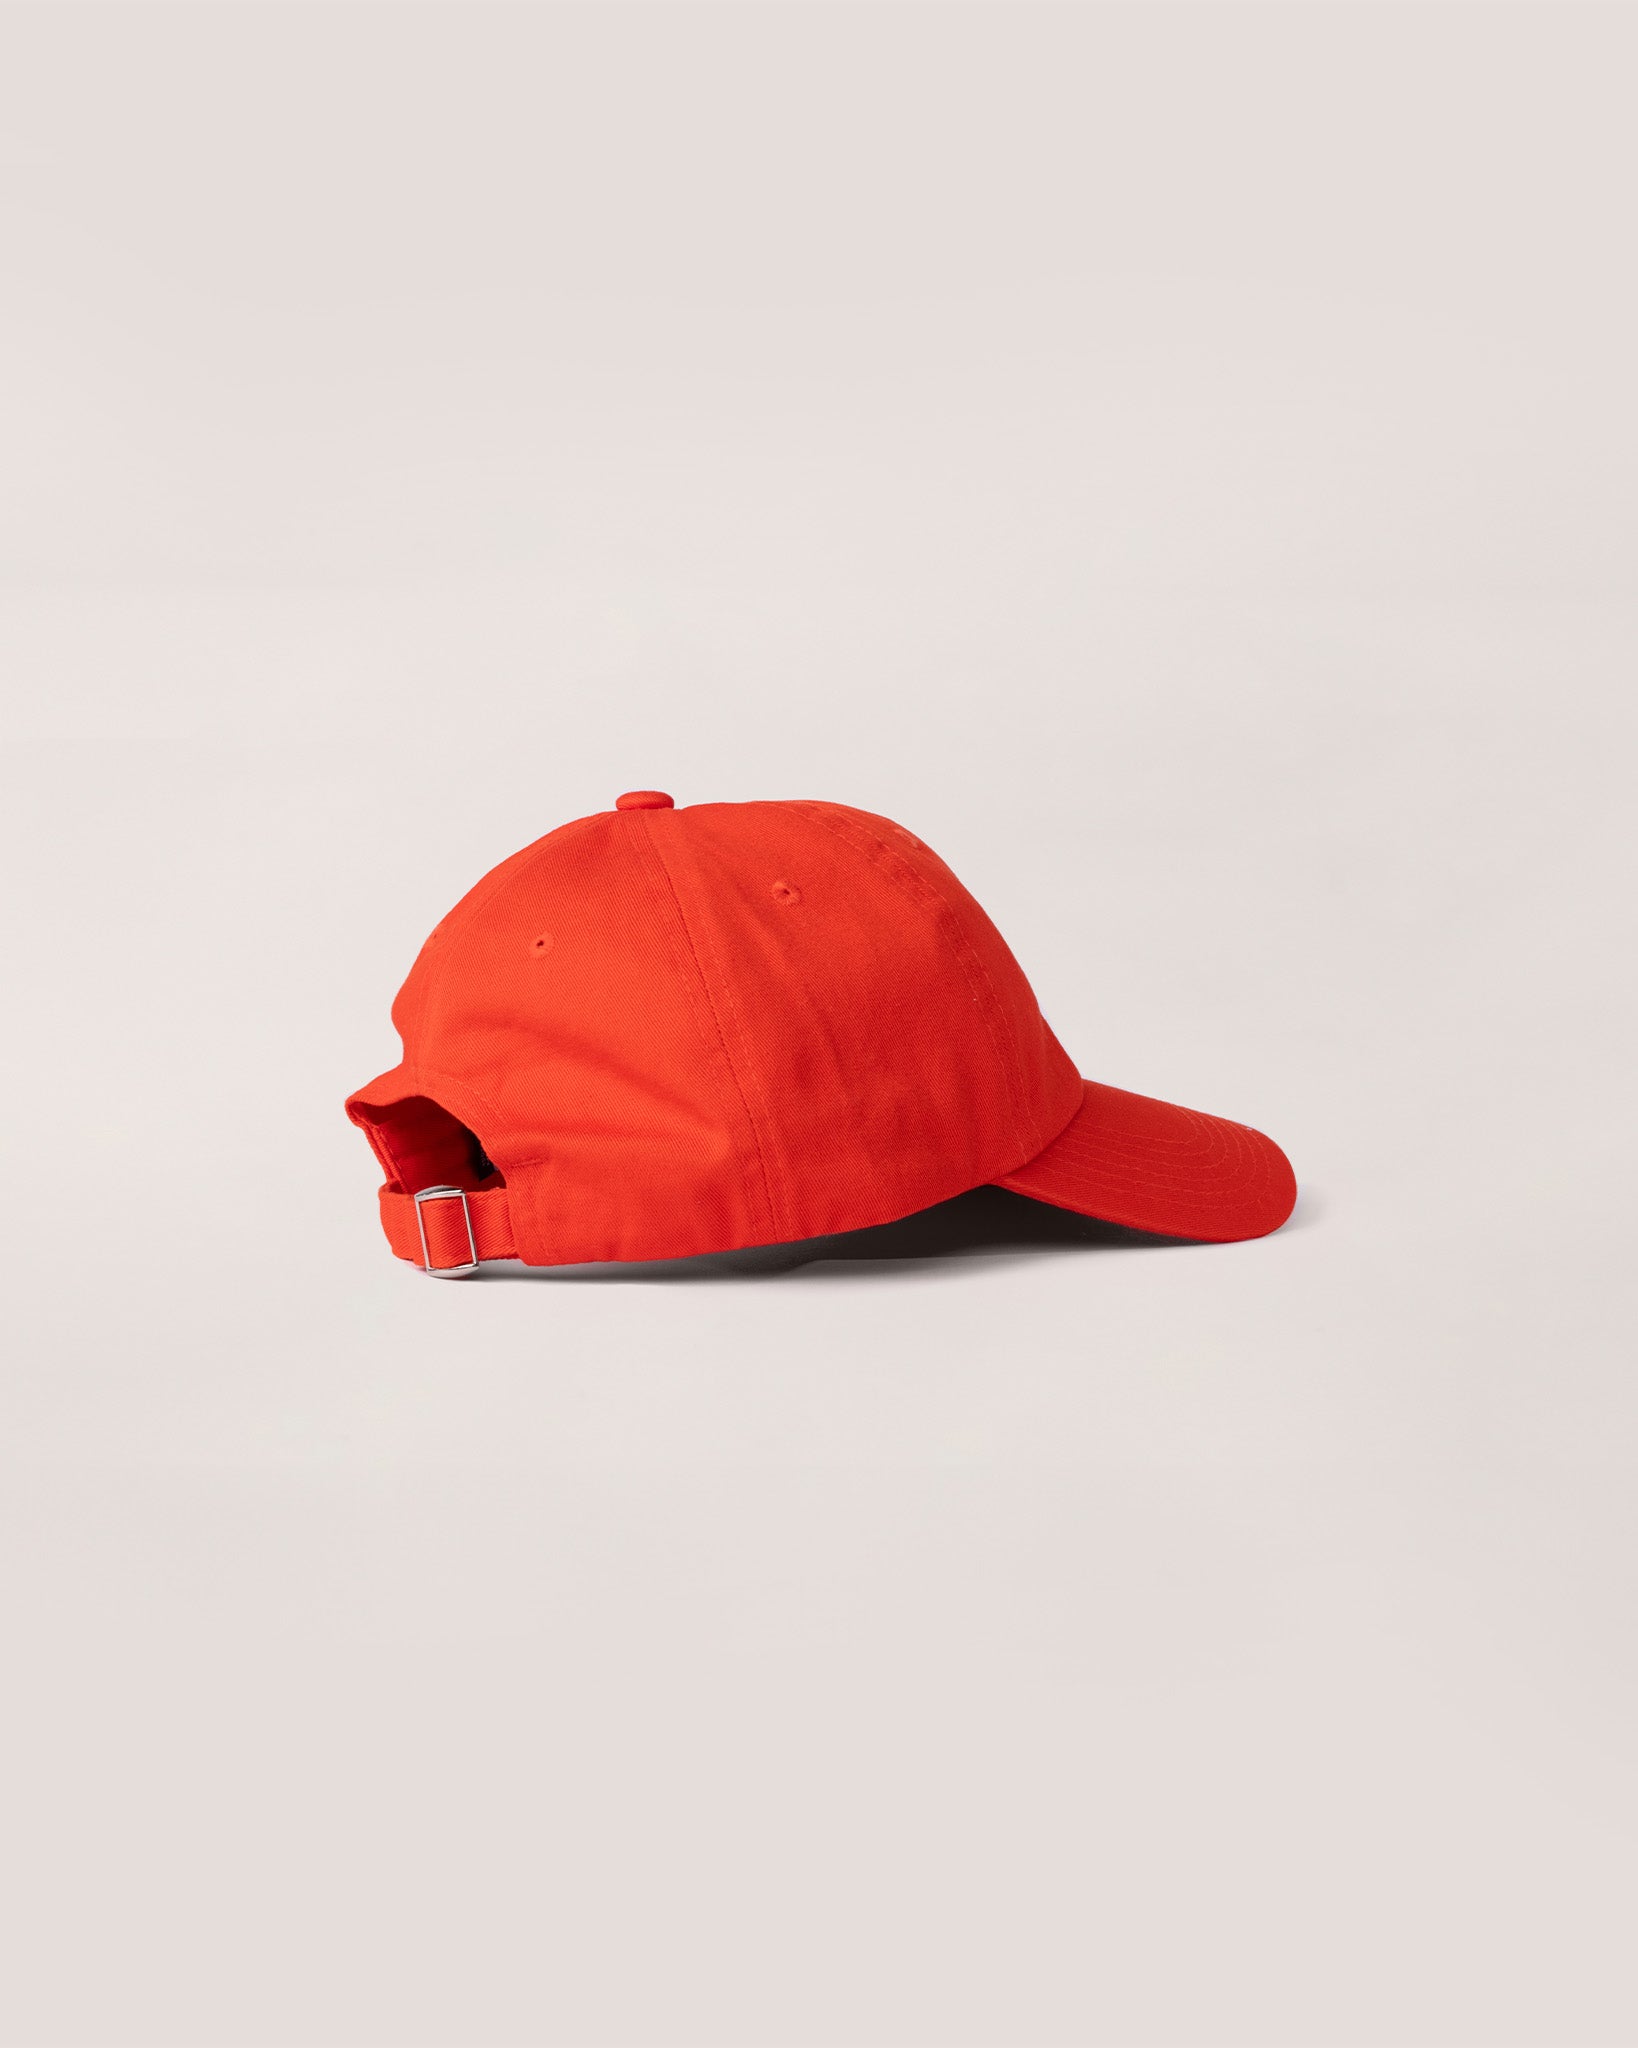 A side view of an orange hat. 